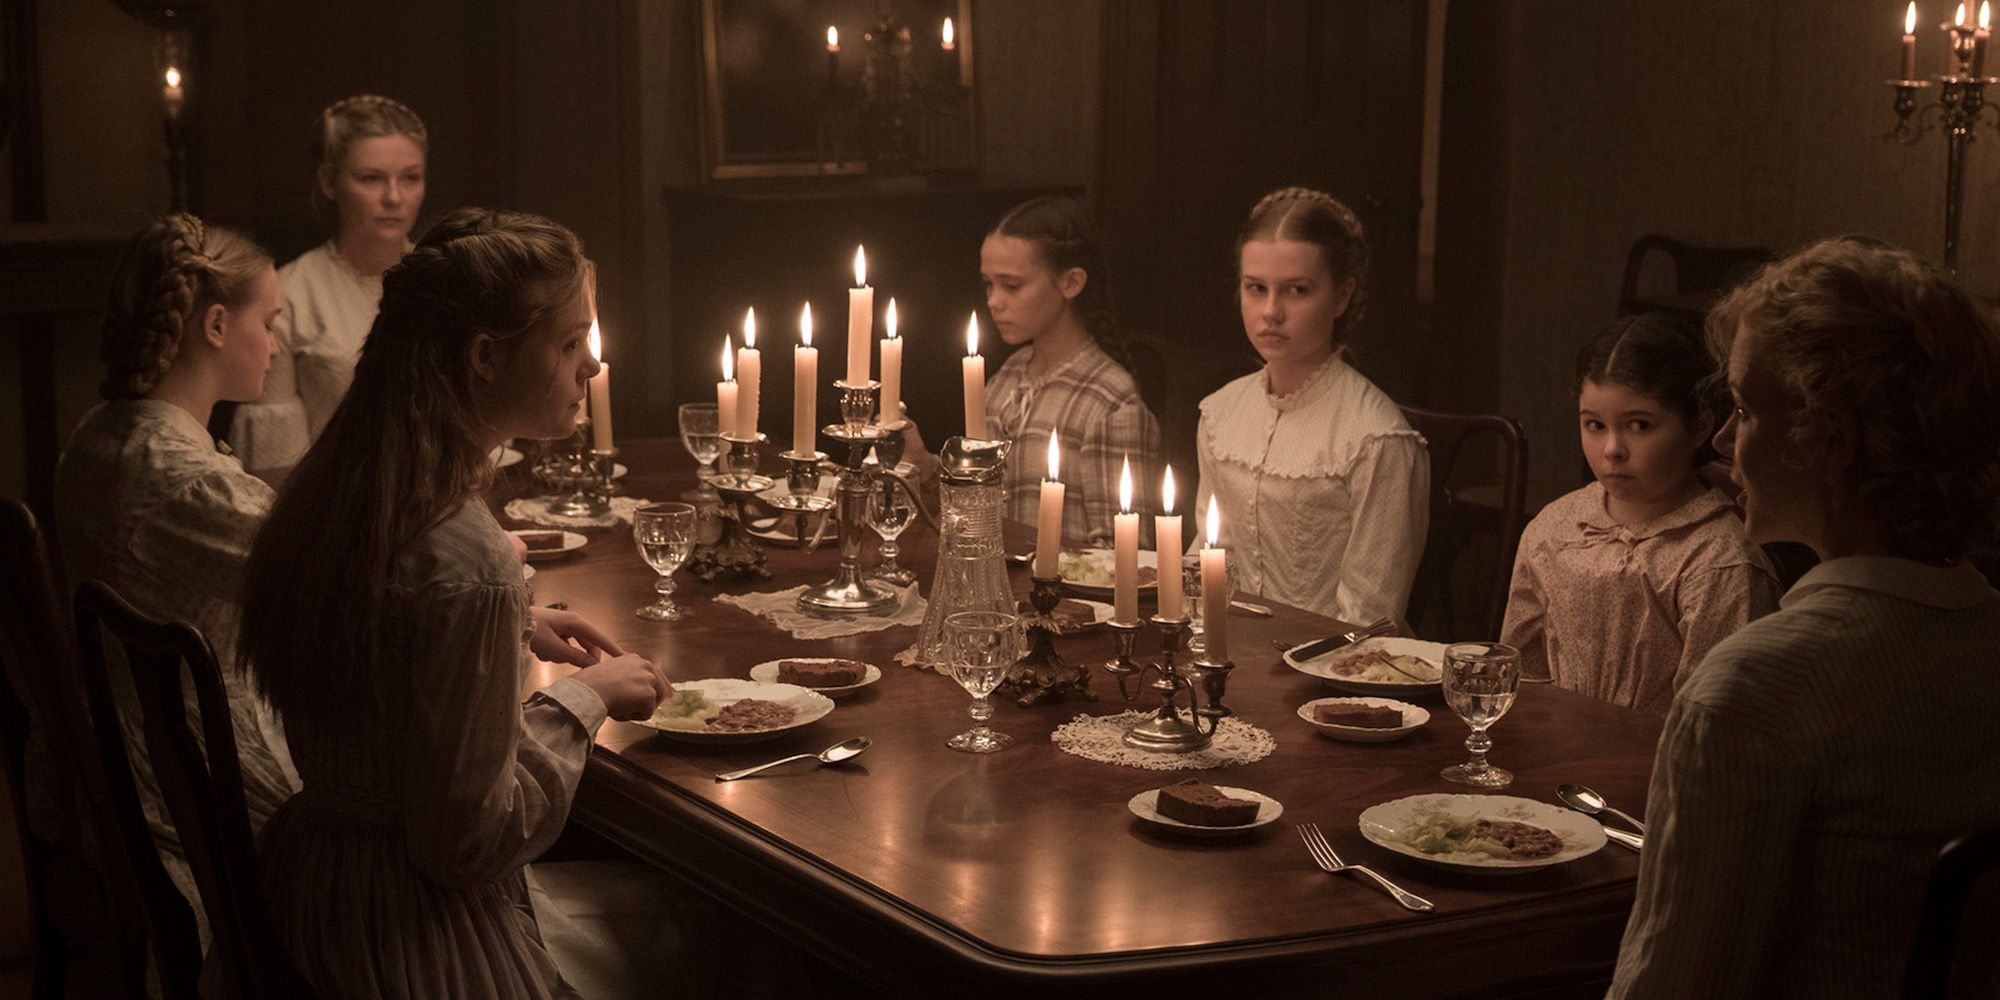 Miss Martha and her family sit around a candle lit dinner table in The Beguiled